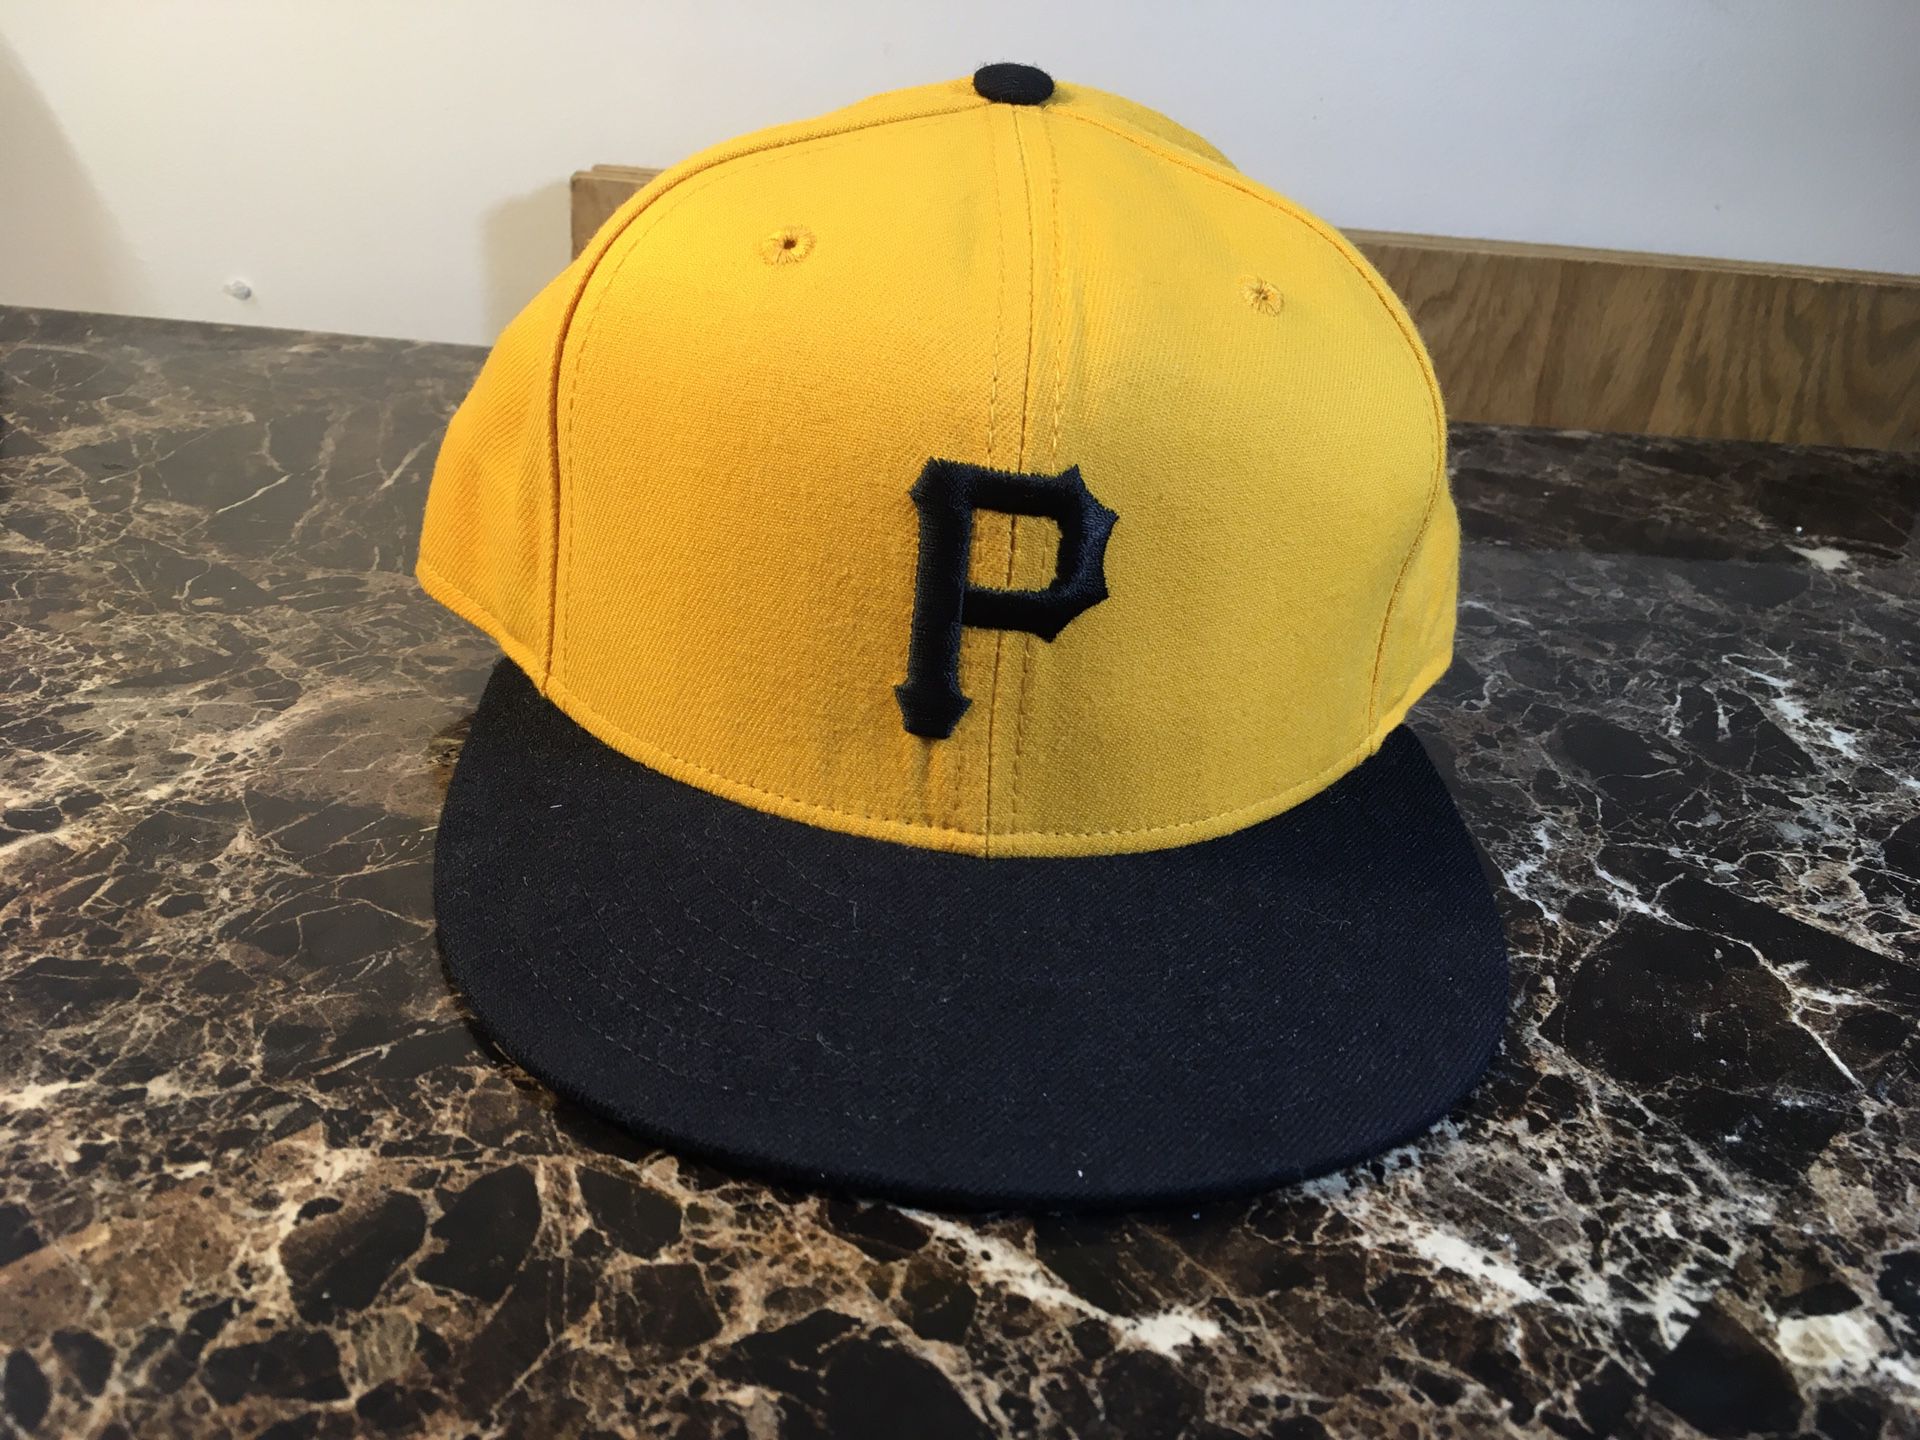 Pittsburgh Pirates Cooperstown Collection cap/hat